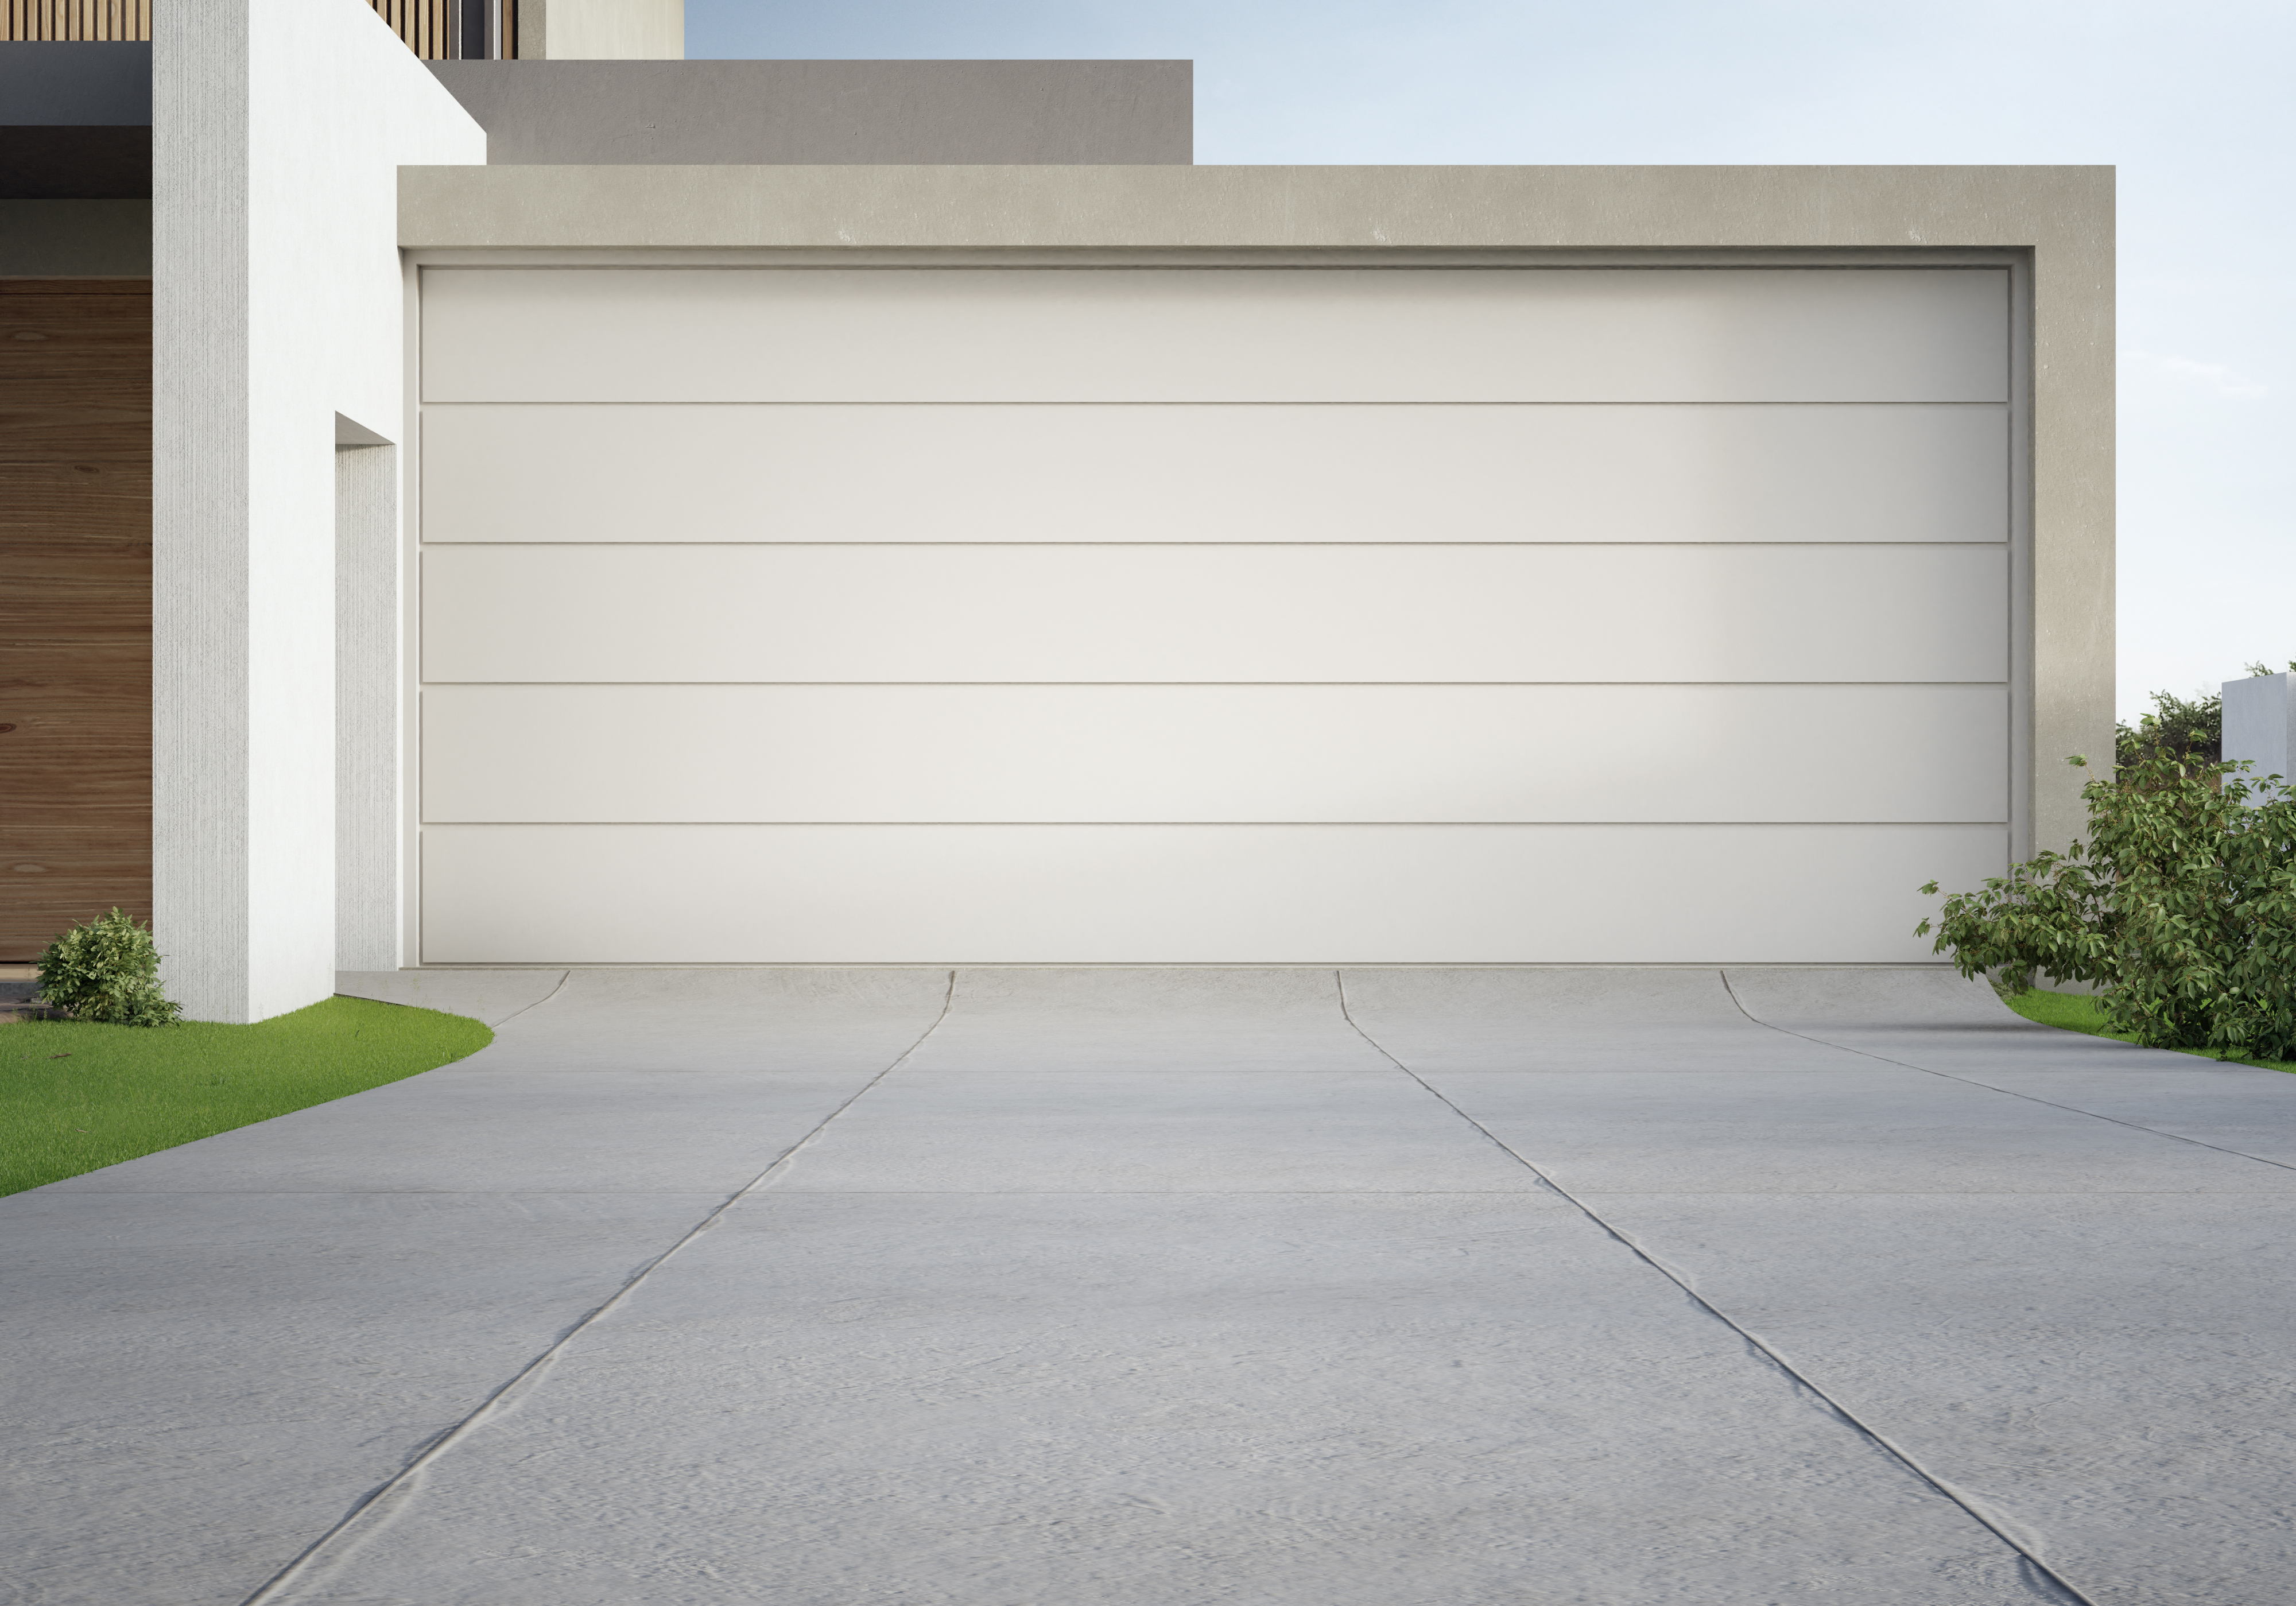 Modern house and big garage with concrete driveway. 3d illustration of residential building exterior.